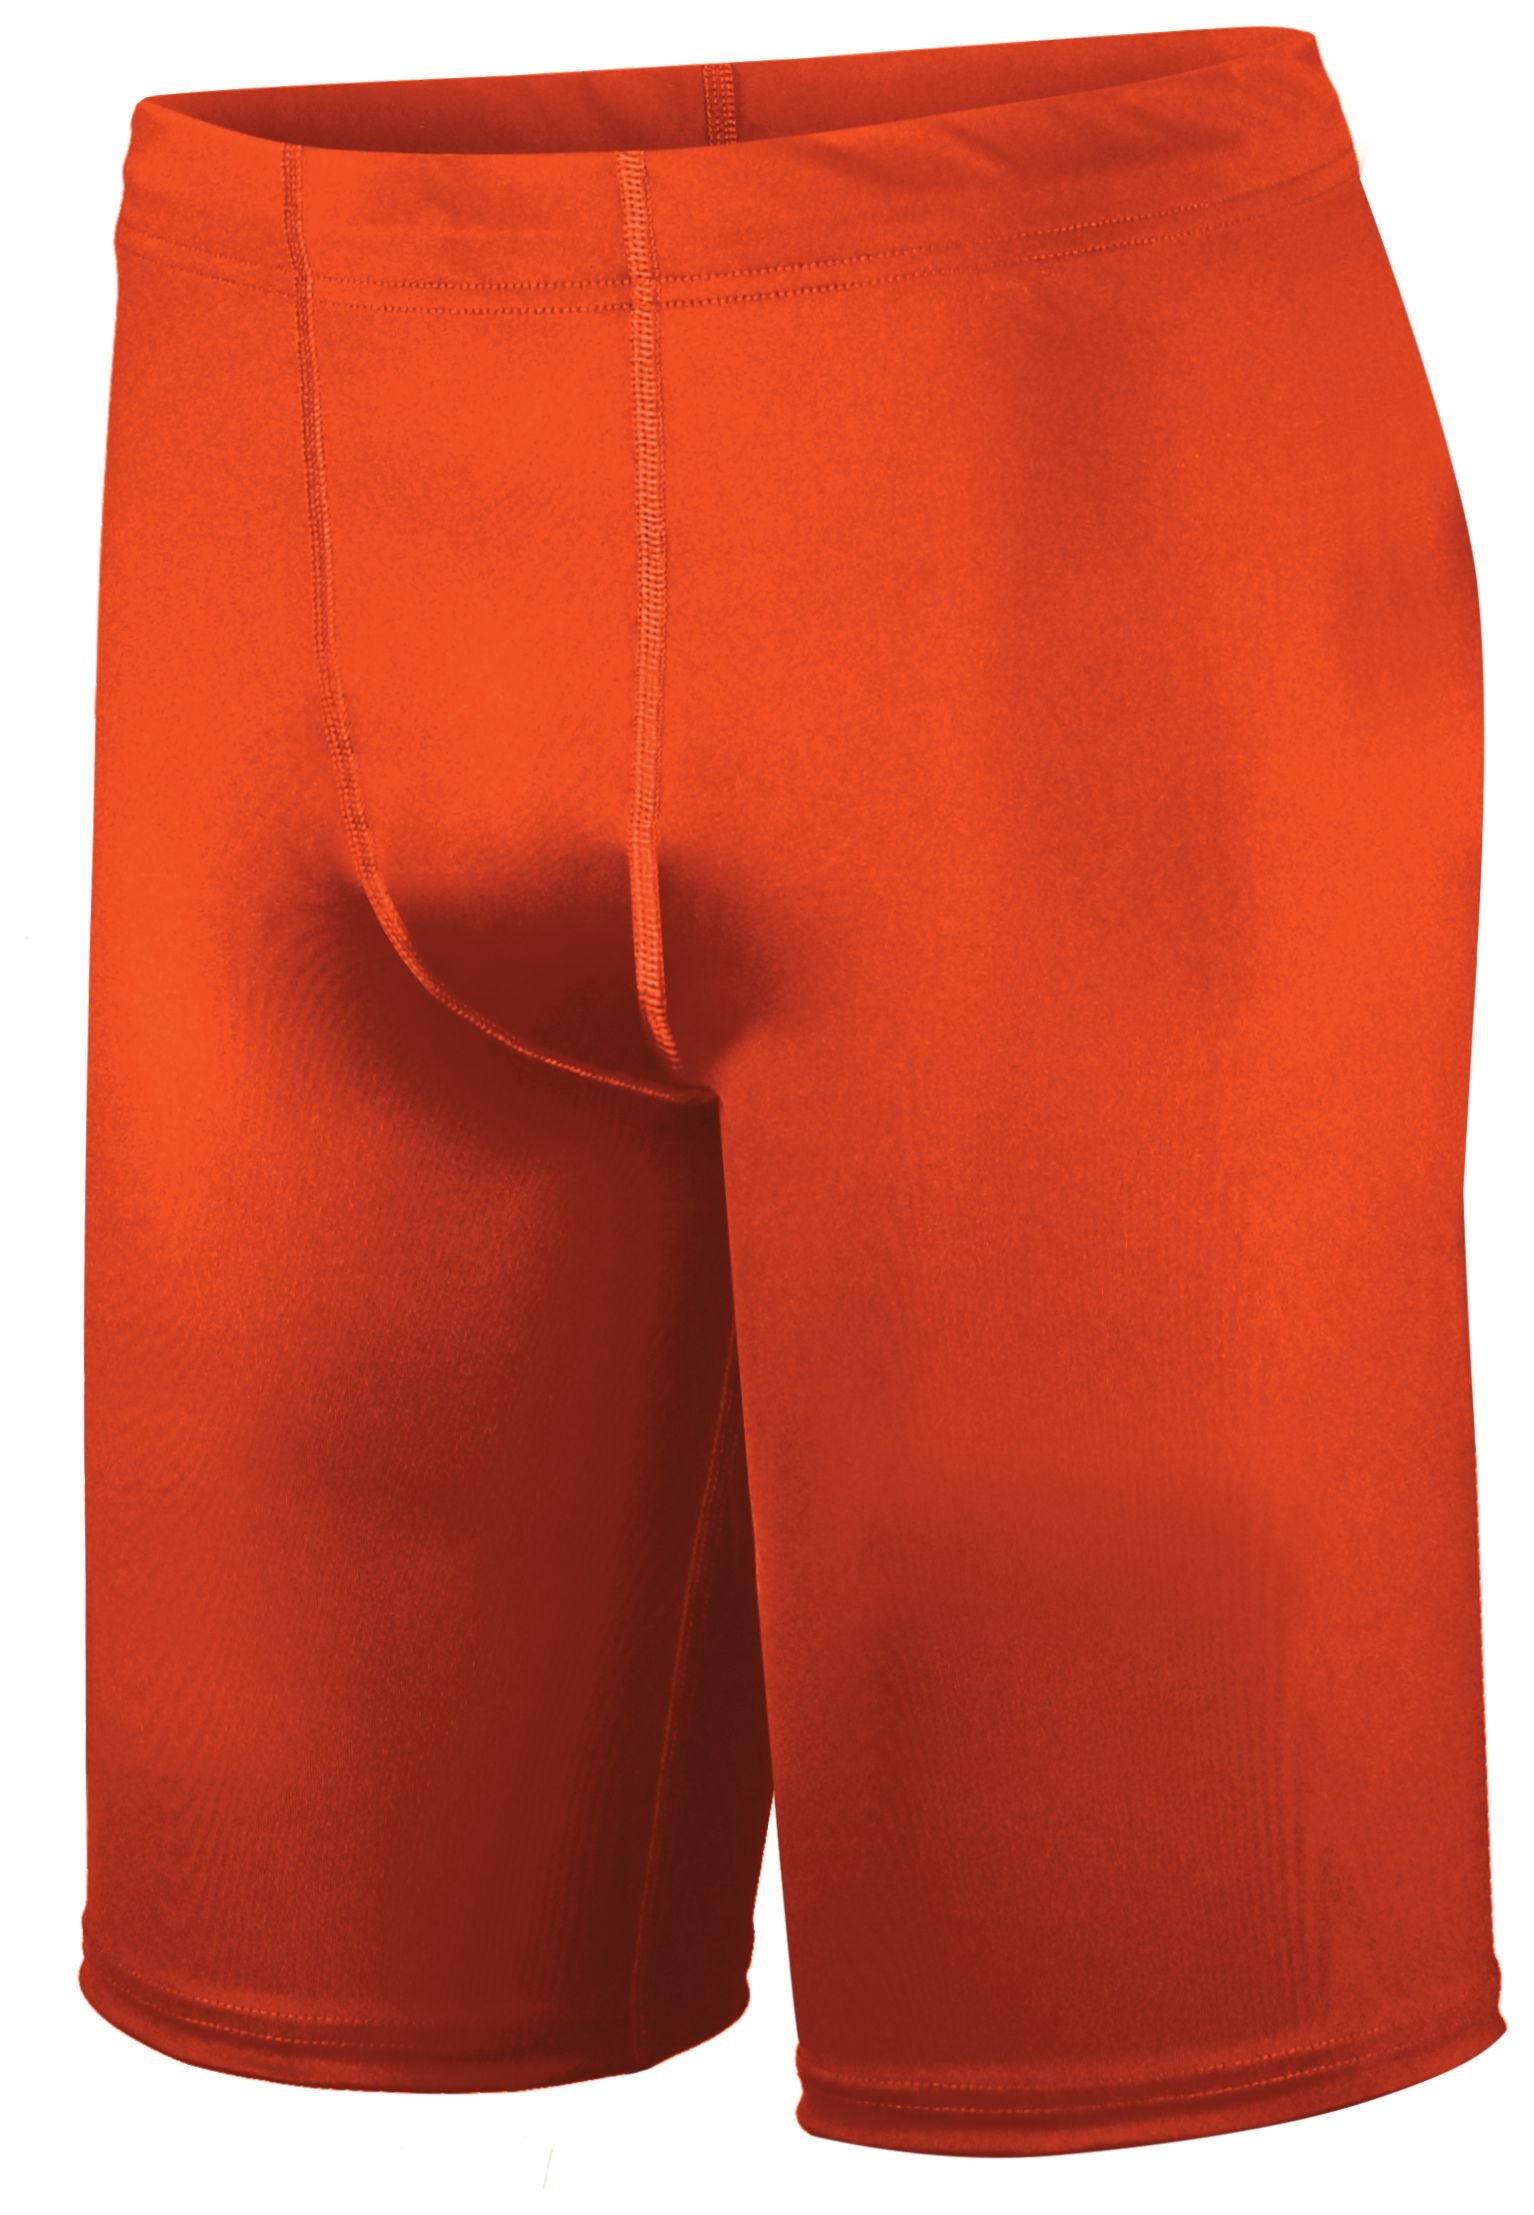 Holloway Pr Max Compression Shorts in Orange  -Part of the Adult, Adult-Shorts, Track-Field, Holloway product lines at KanaleyCreations.com